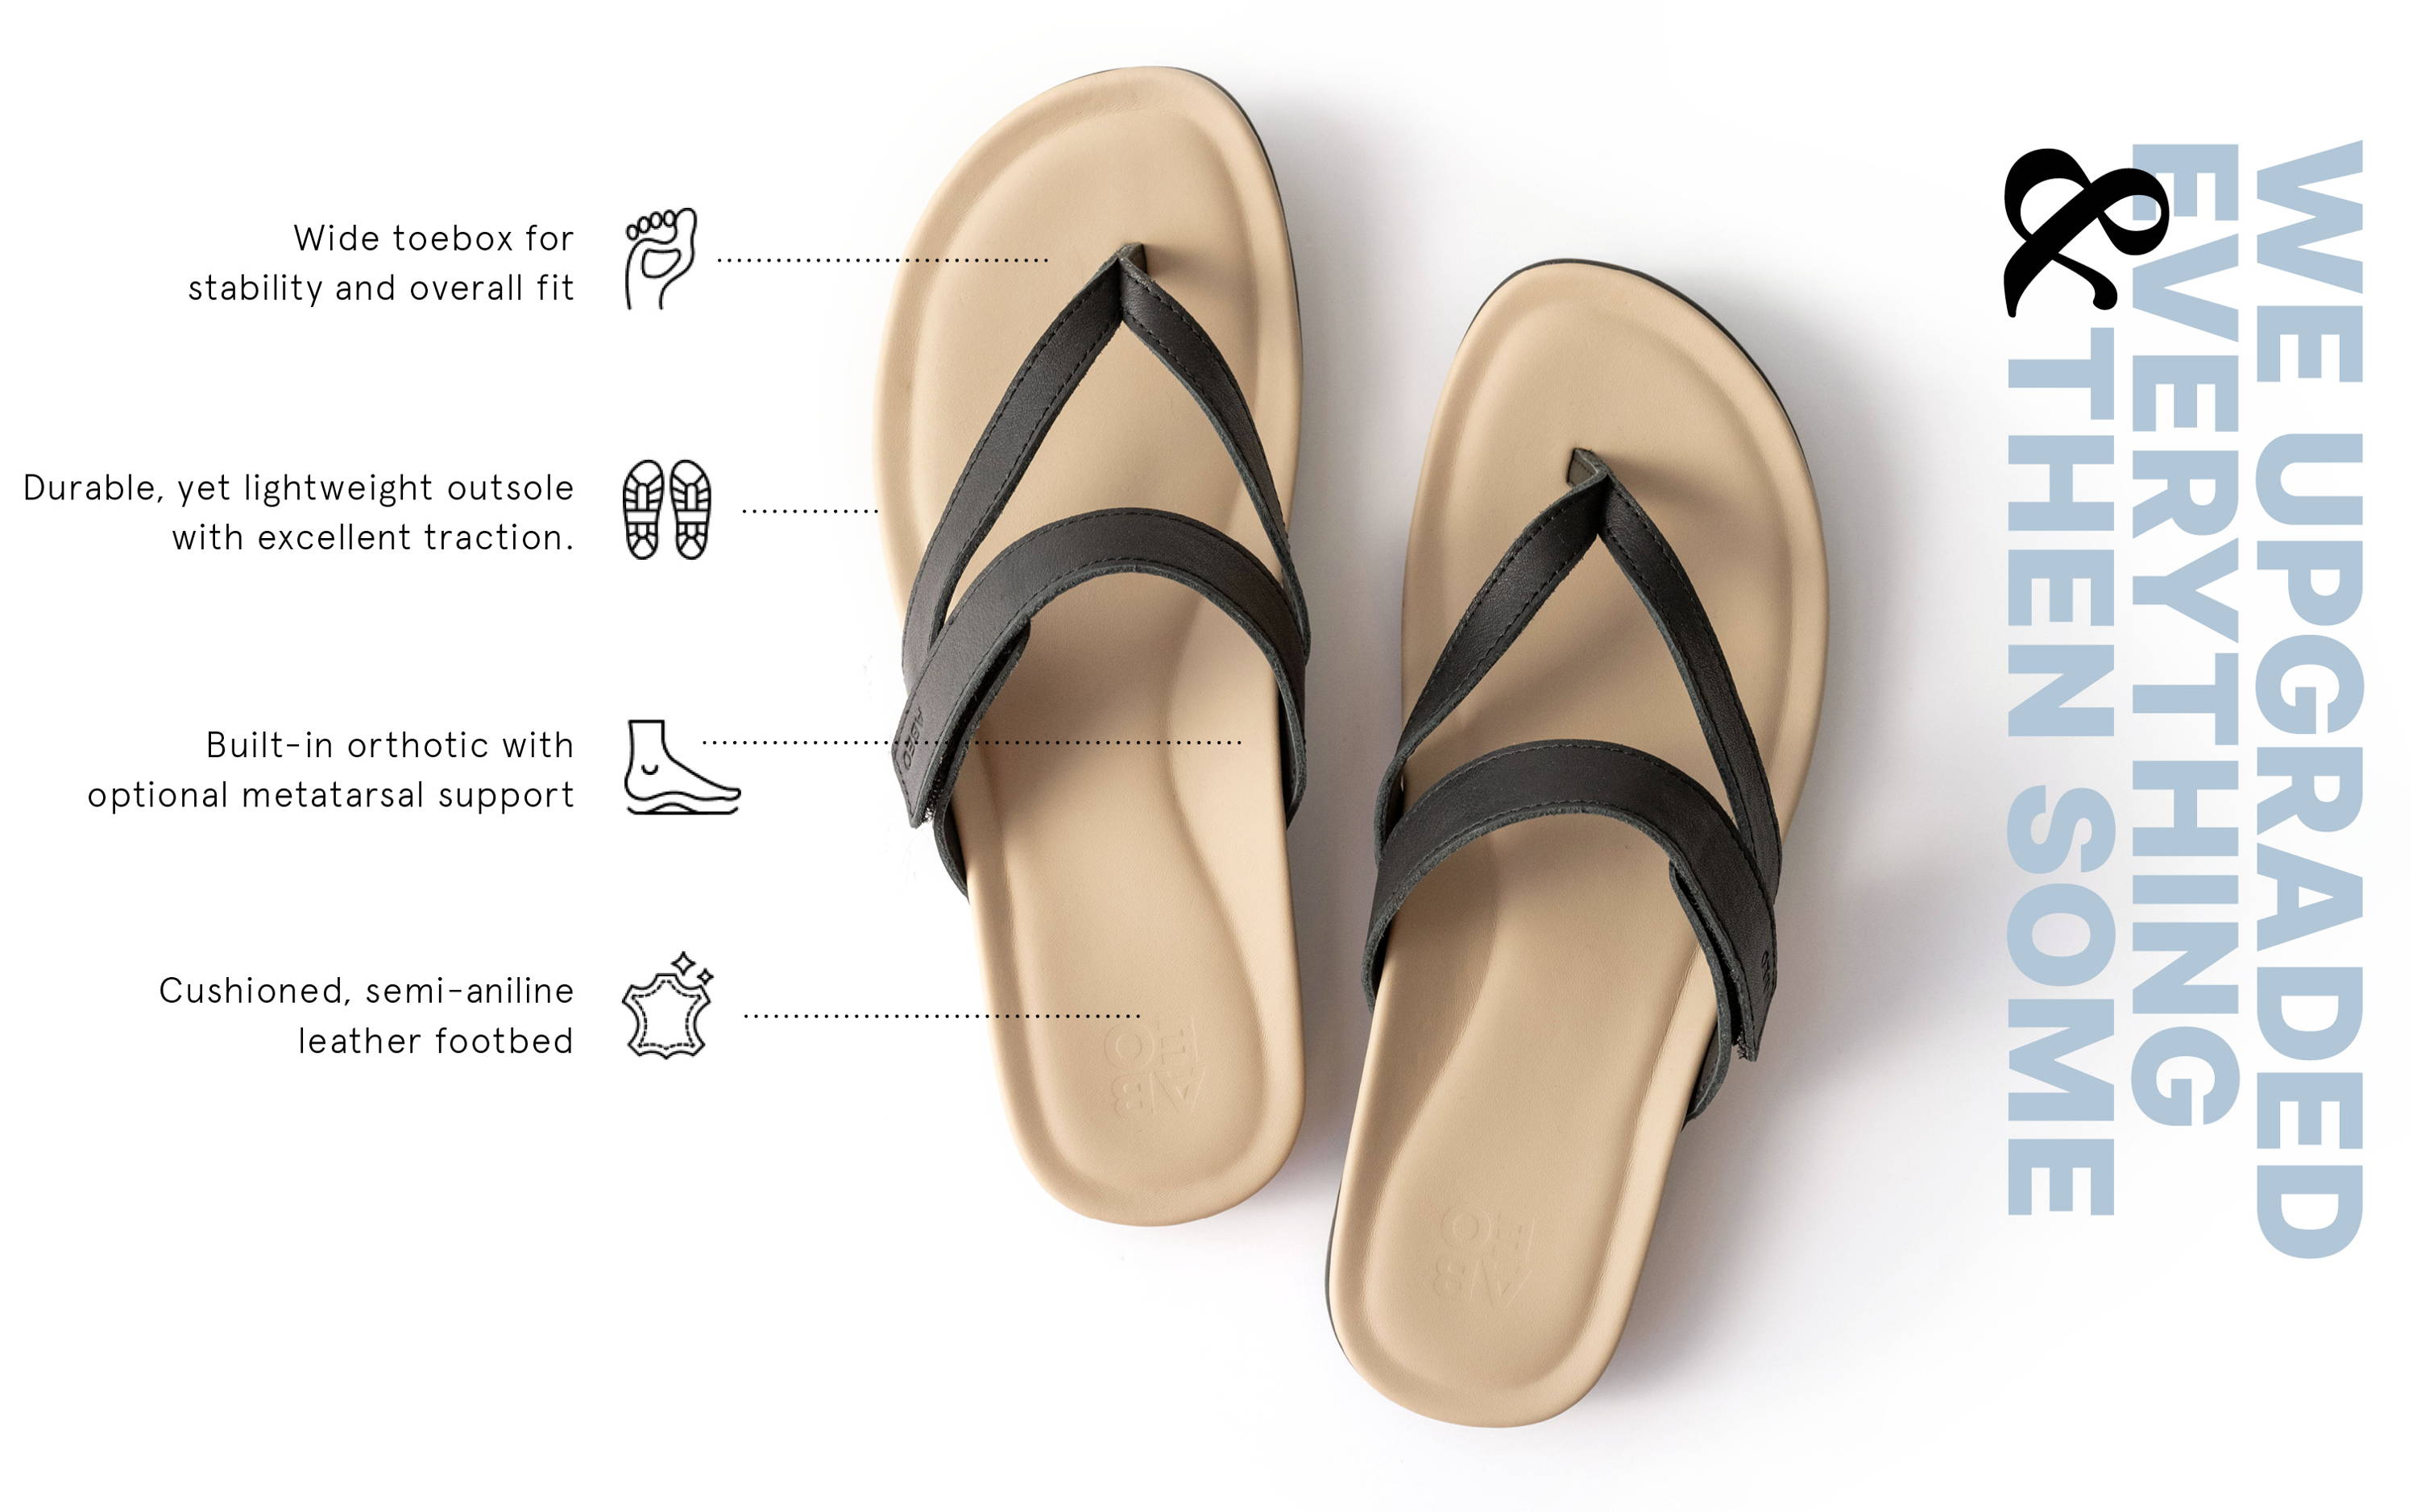 ABEO shoes have a wide toebox, is durable, has built-in orthotics, and a cushioned leather footbed